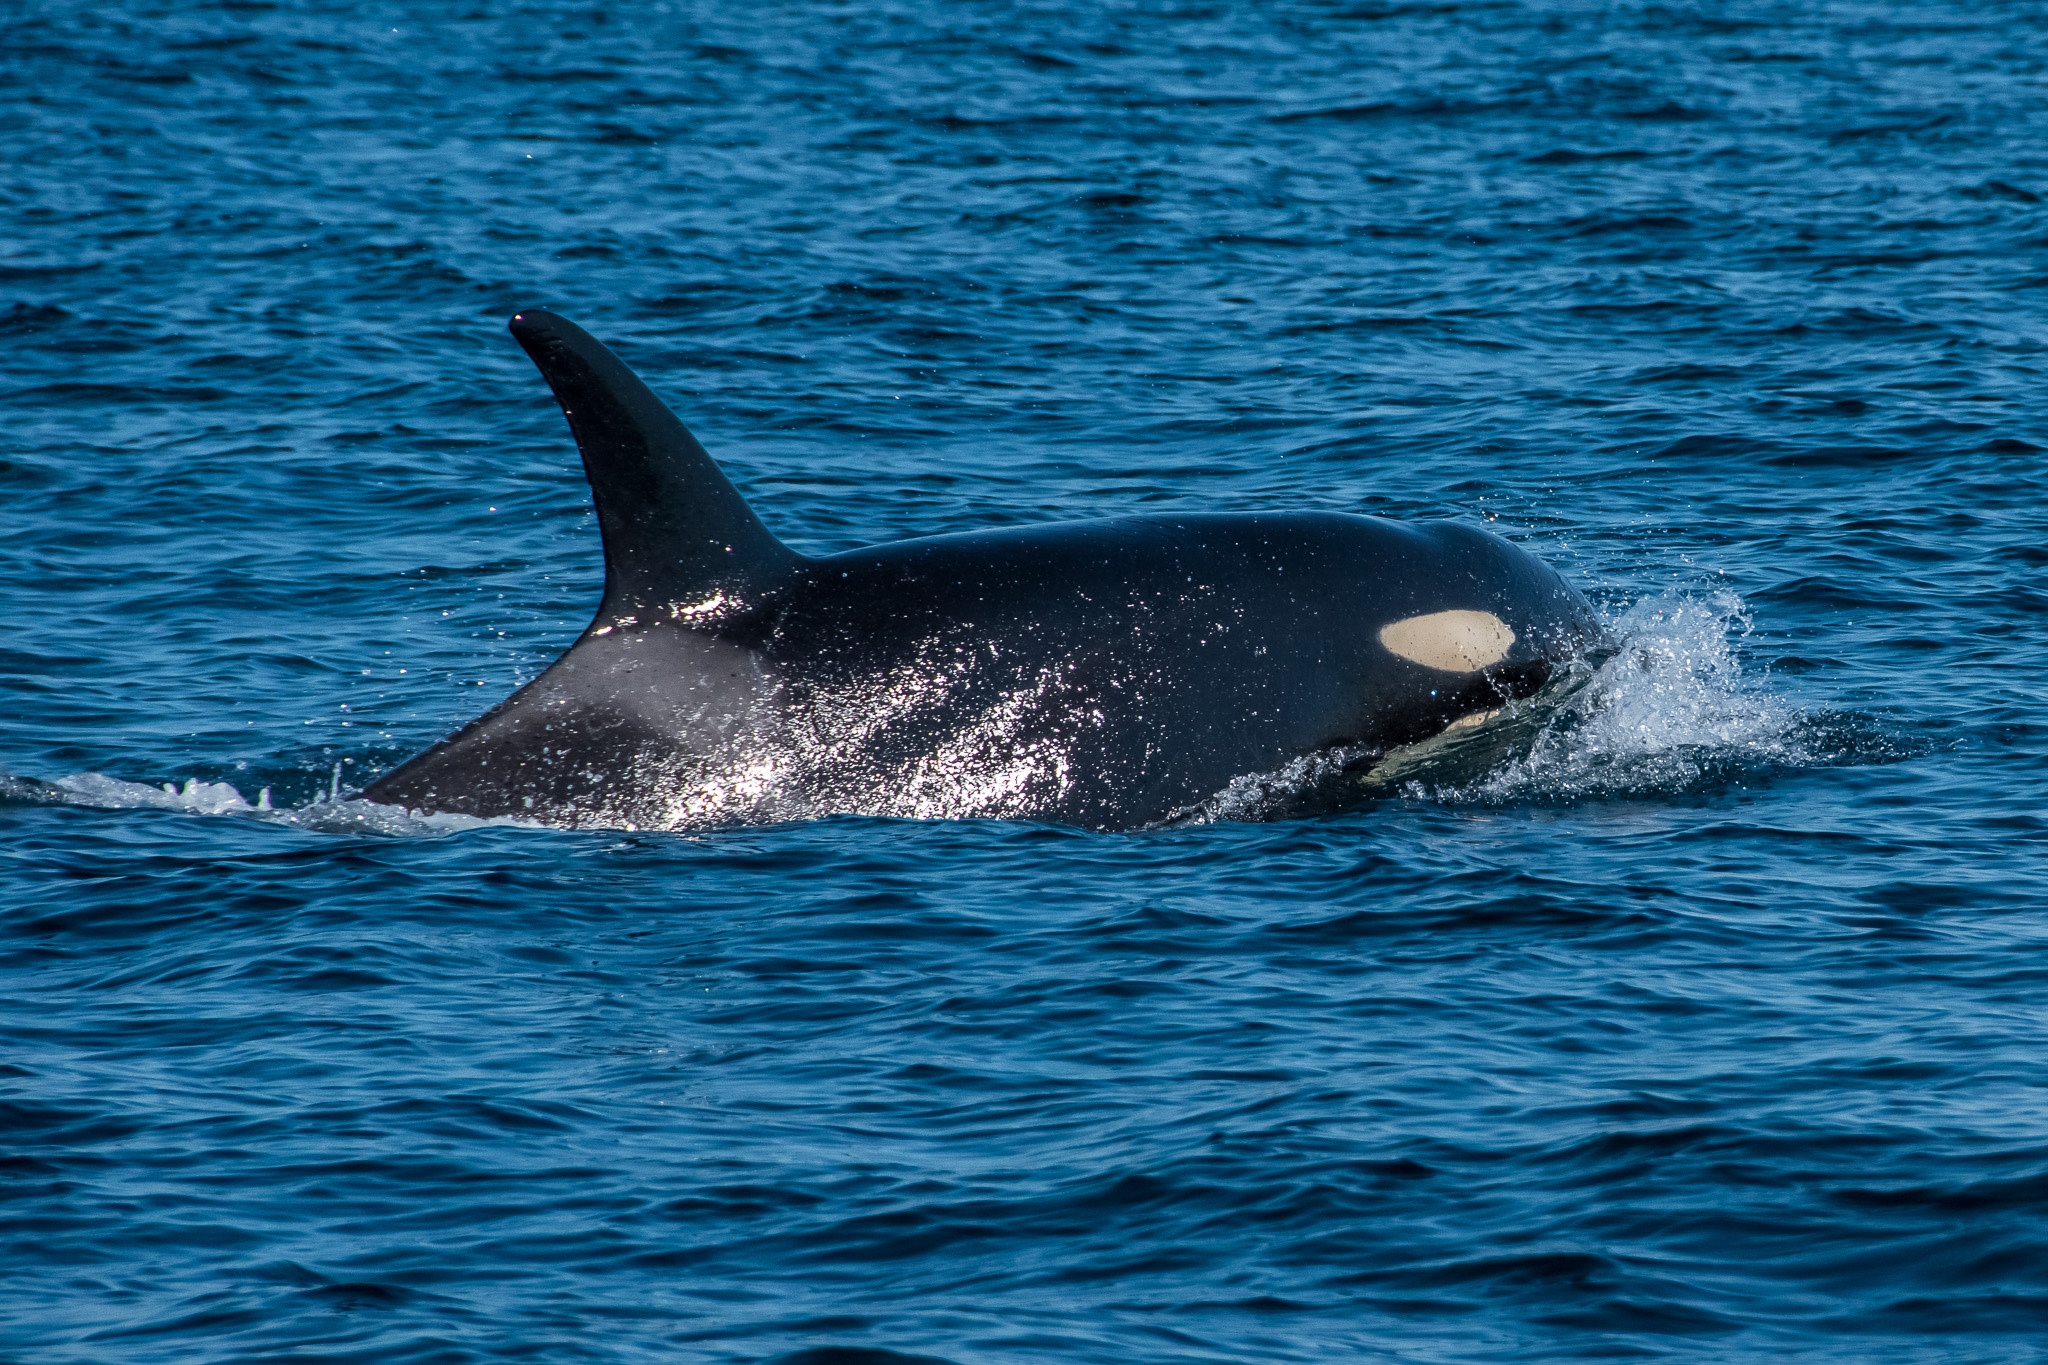 An Orca surfaces and catches the sunlight.